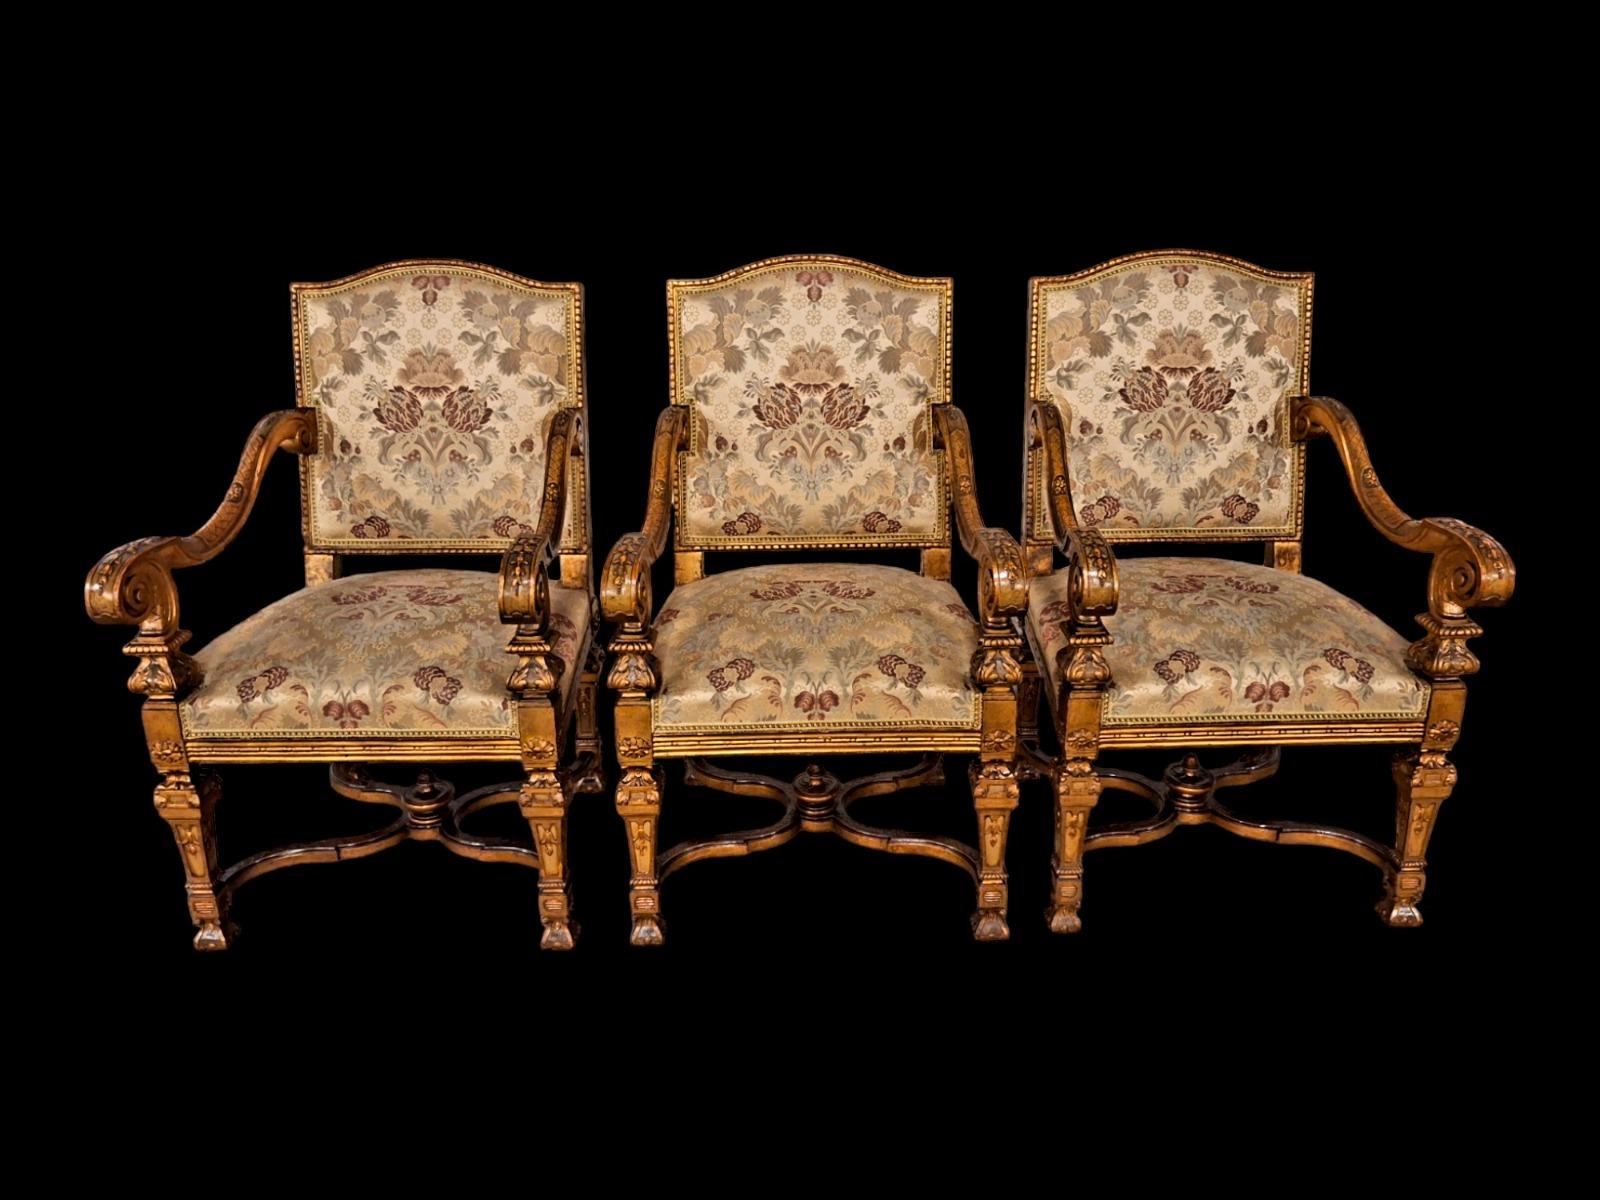 Guilded carved wood salon set in Louis XIV style